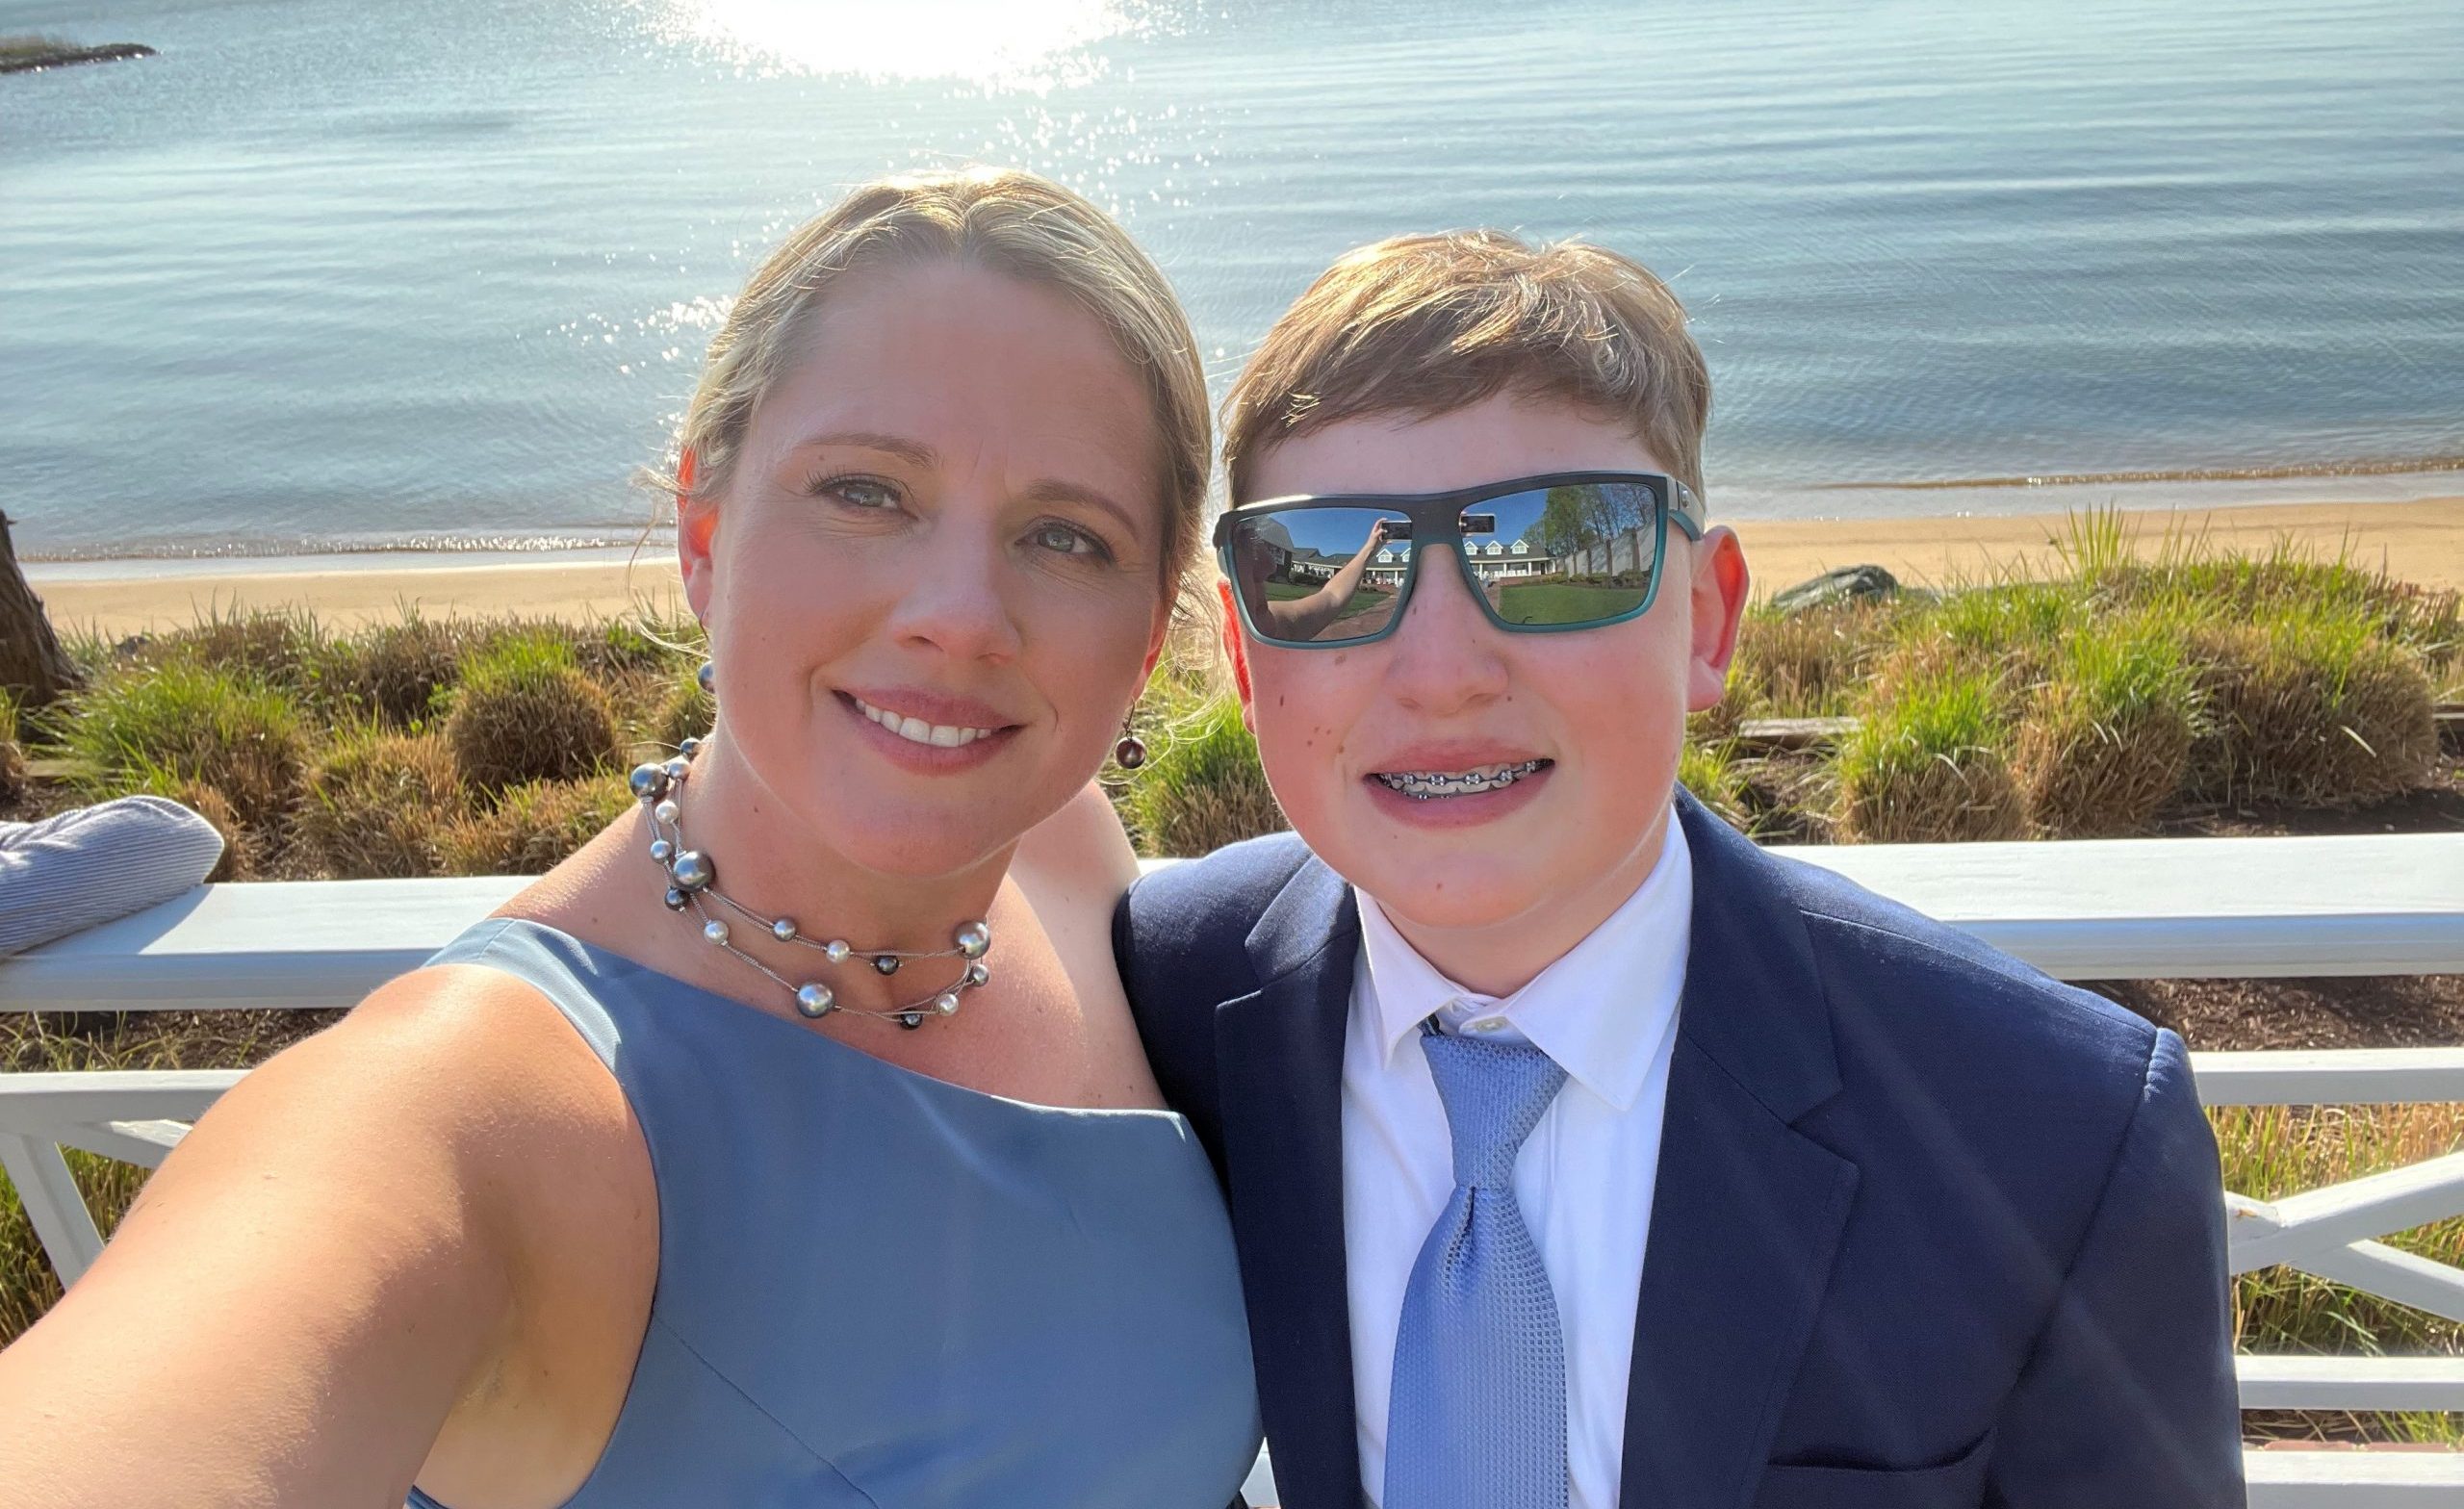 From Healthy to Heart Condition: A Mother’s Account of Her Son’s Myocarditis Battle